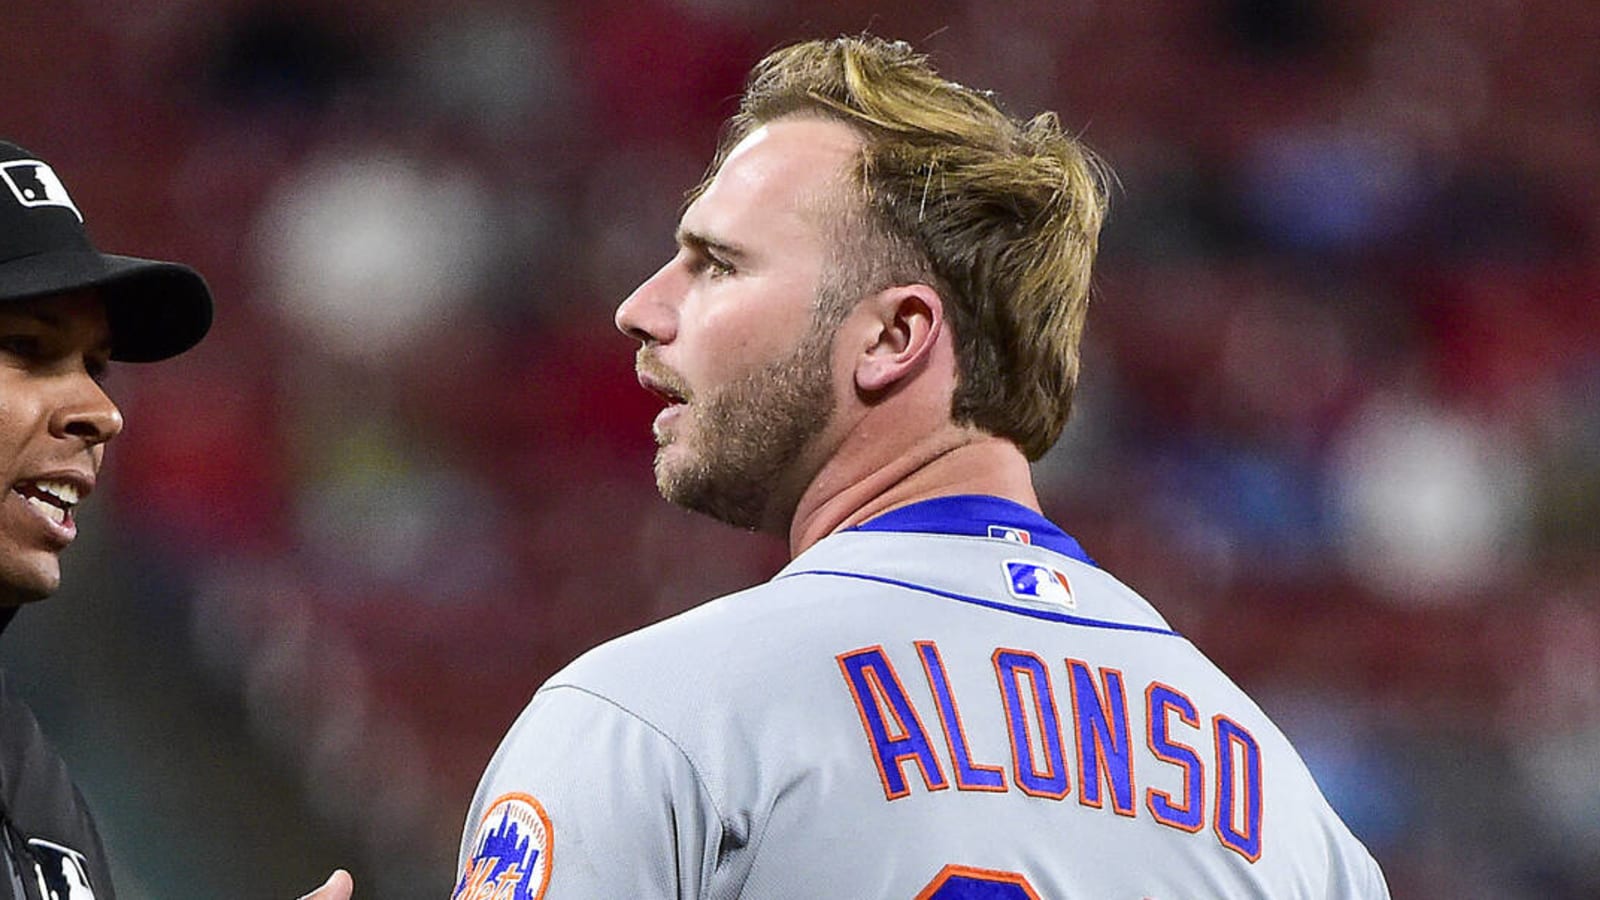 Mets' Pete Alonso upset with Stubby Clapp over ‘cheap’ move